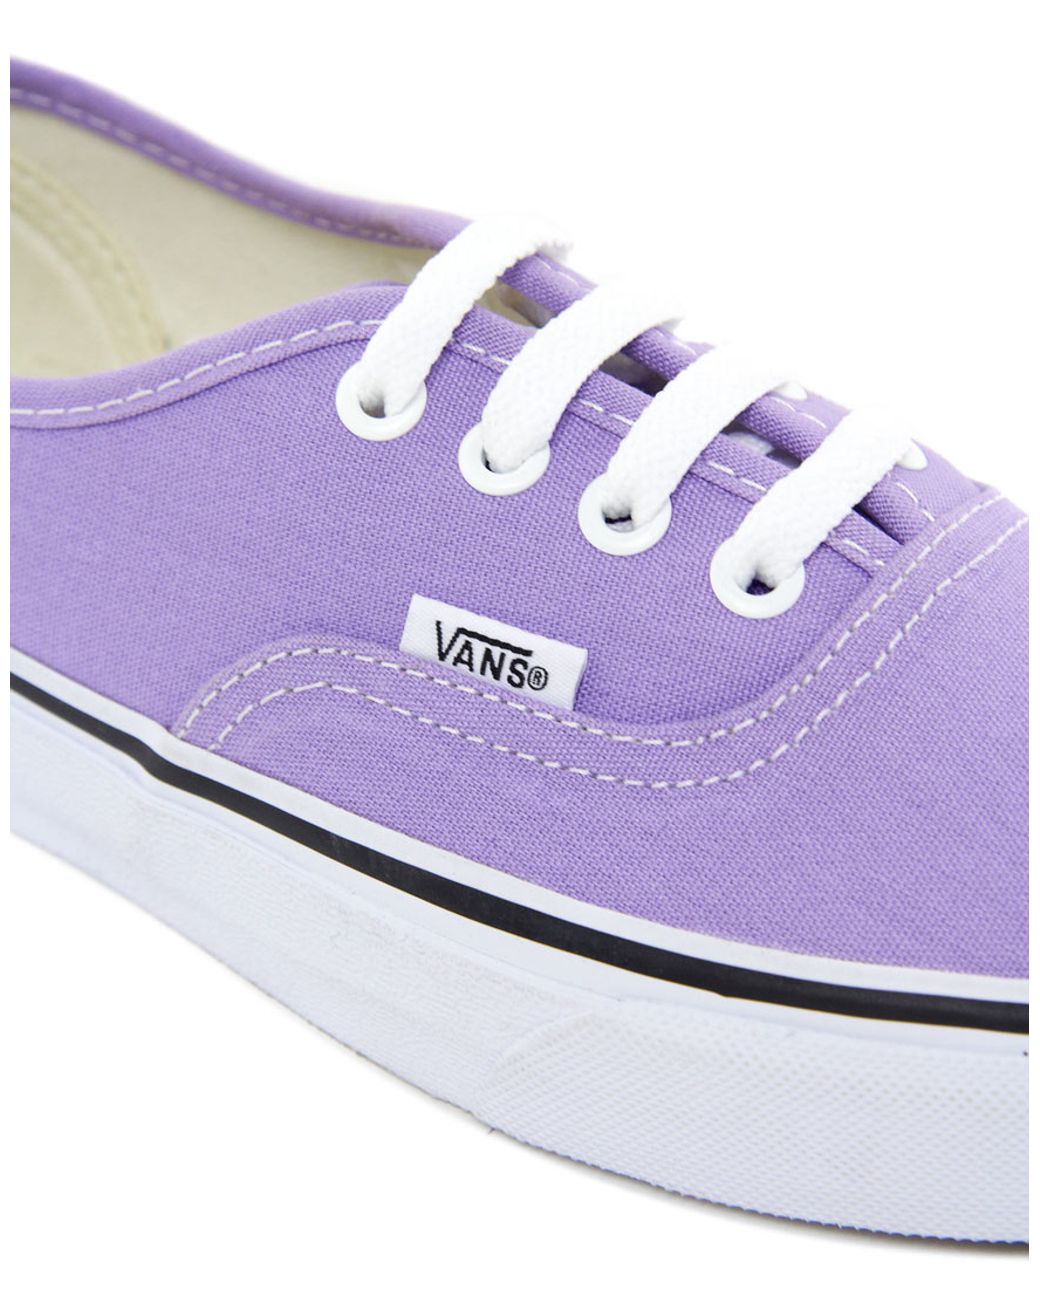 Vans Authentic Lilac Trainers in Purple | Lyst